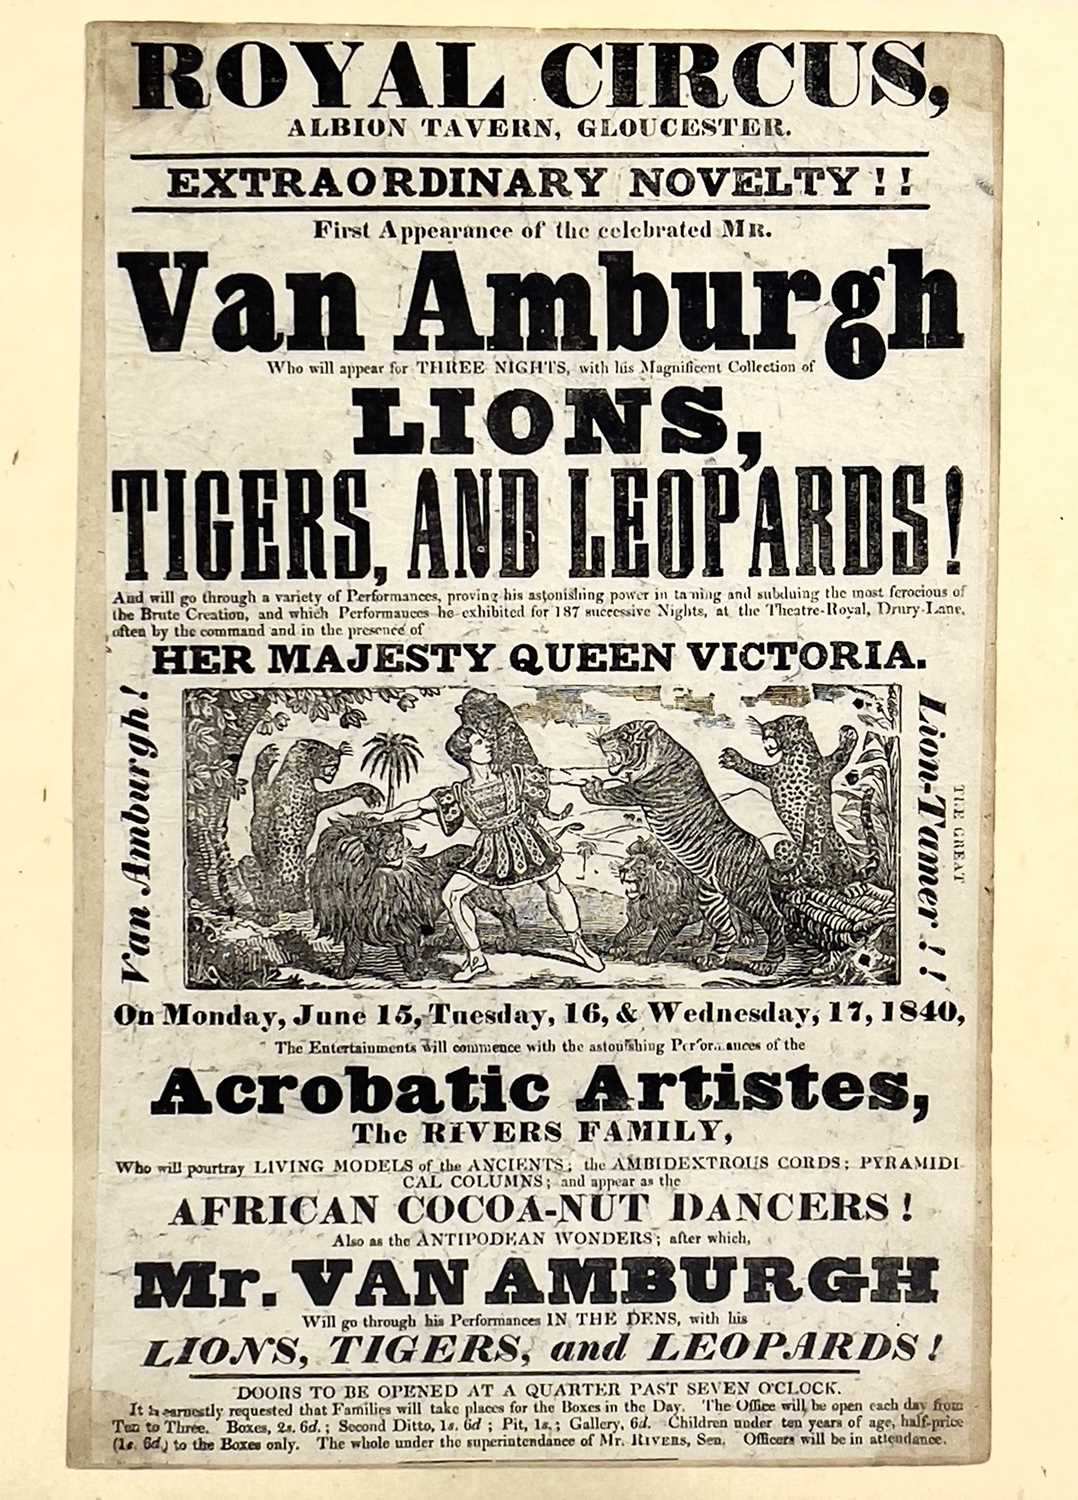 A rare early Victorian circus advertising poster or flyer Mr Van Amburgh the Great Lion-Tamer.